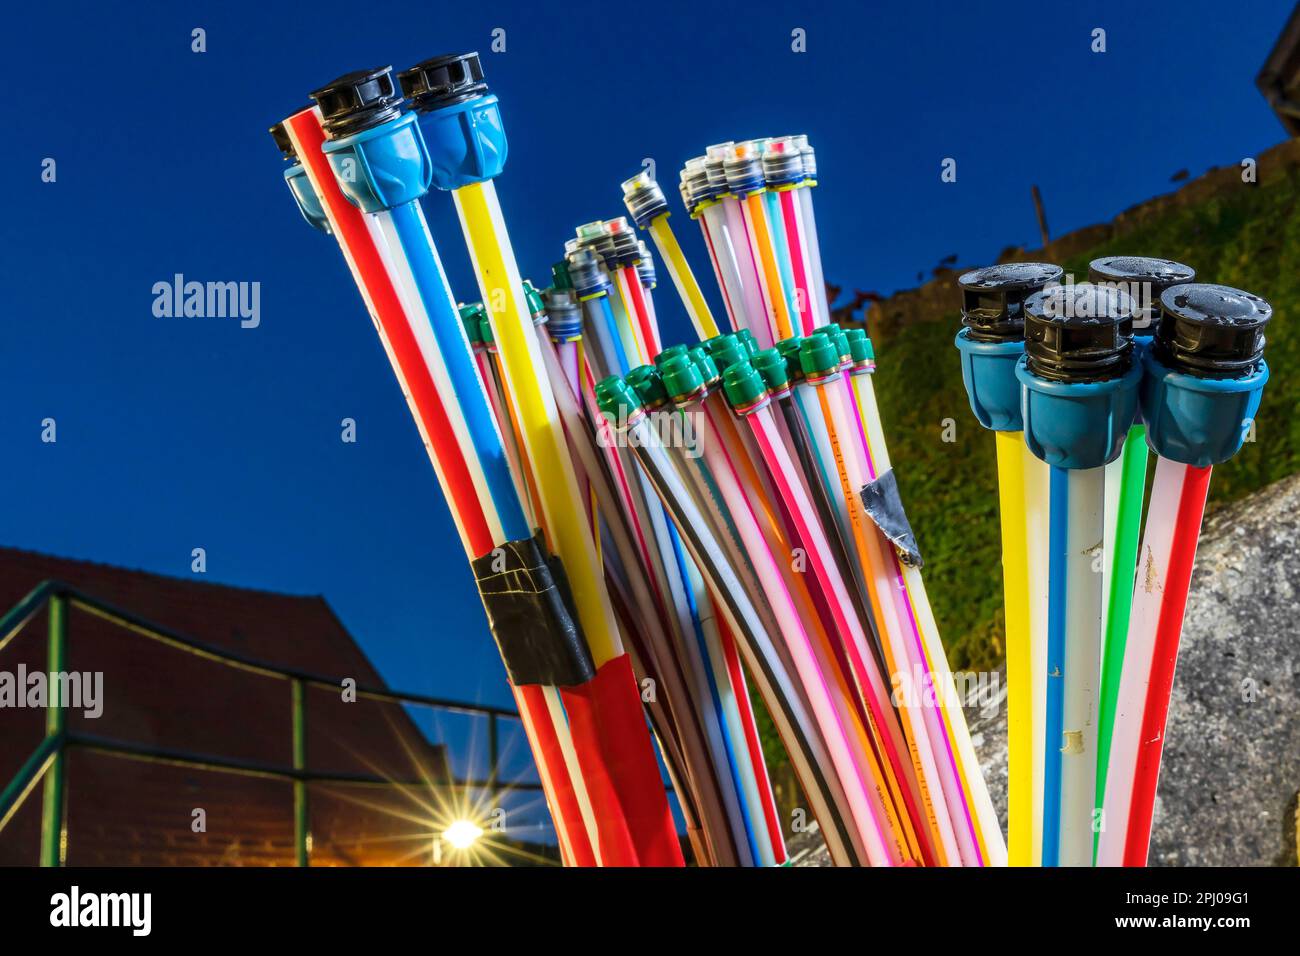 Broadband infrastructure, fast internet and communication through fibre optic cables, rural region, Muensingen, Baden-Wuerttemberg, Germany Stock Photo